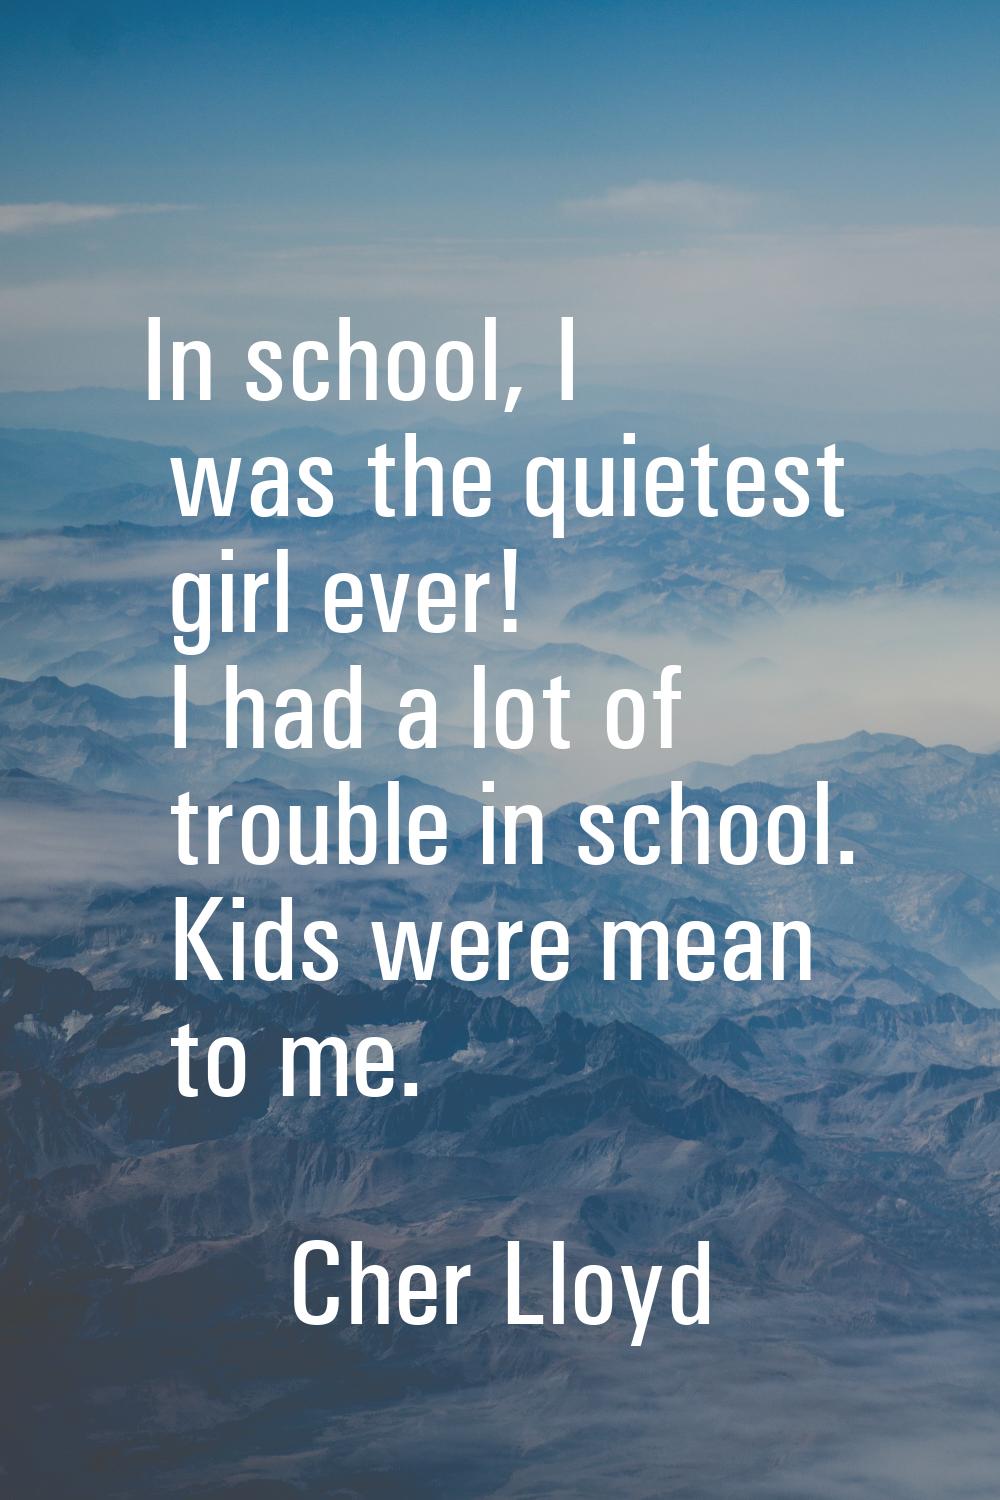 In school, I was the quietest girl ever! I had a lot of trouble in school. Kids were mean to me.